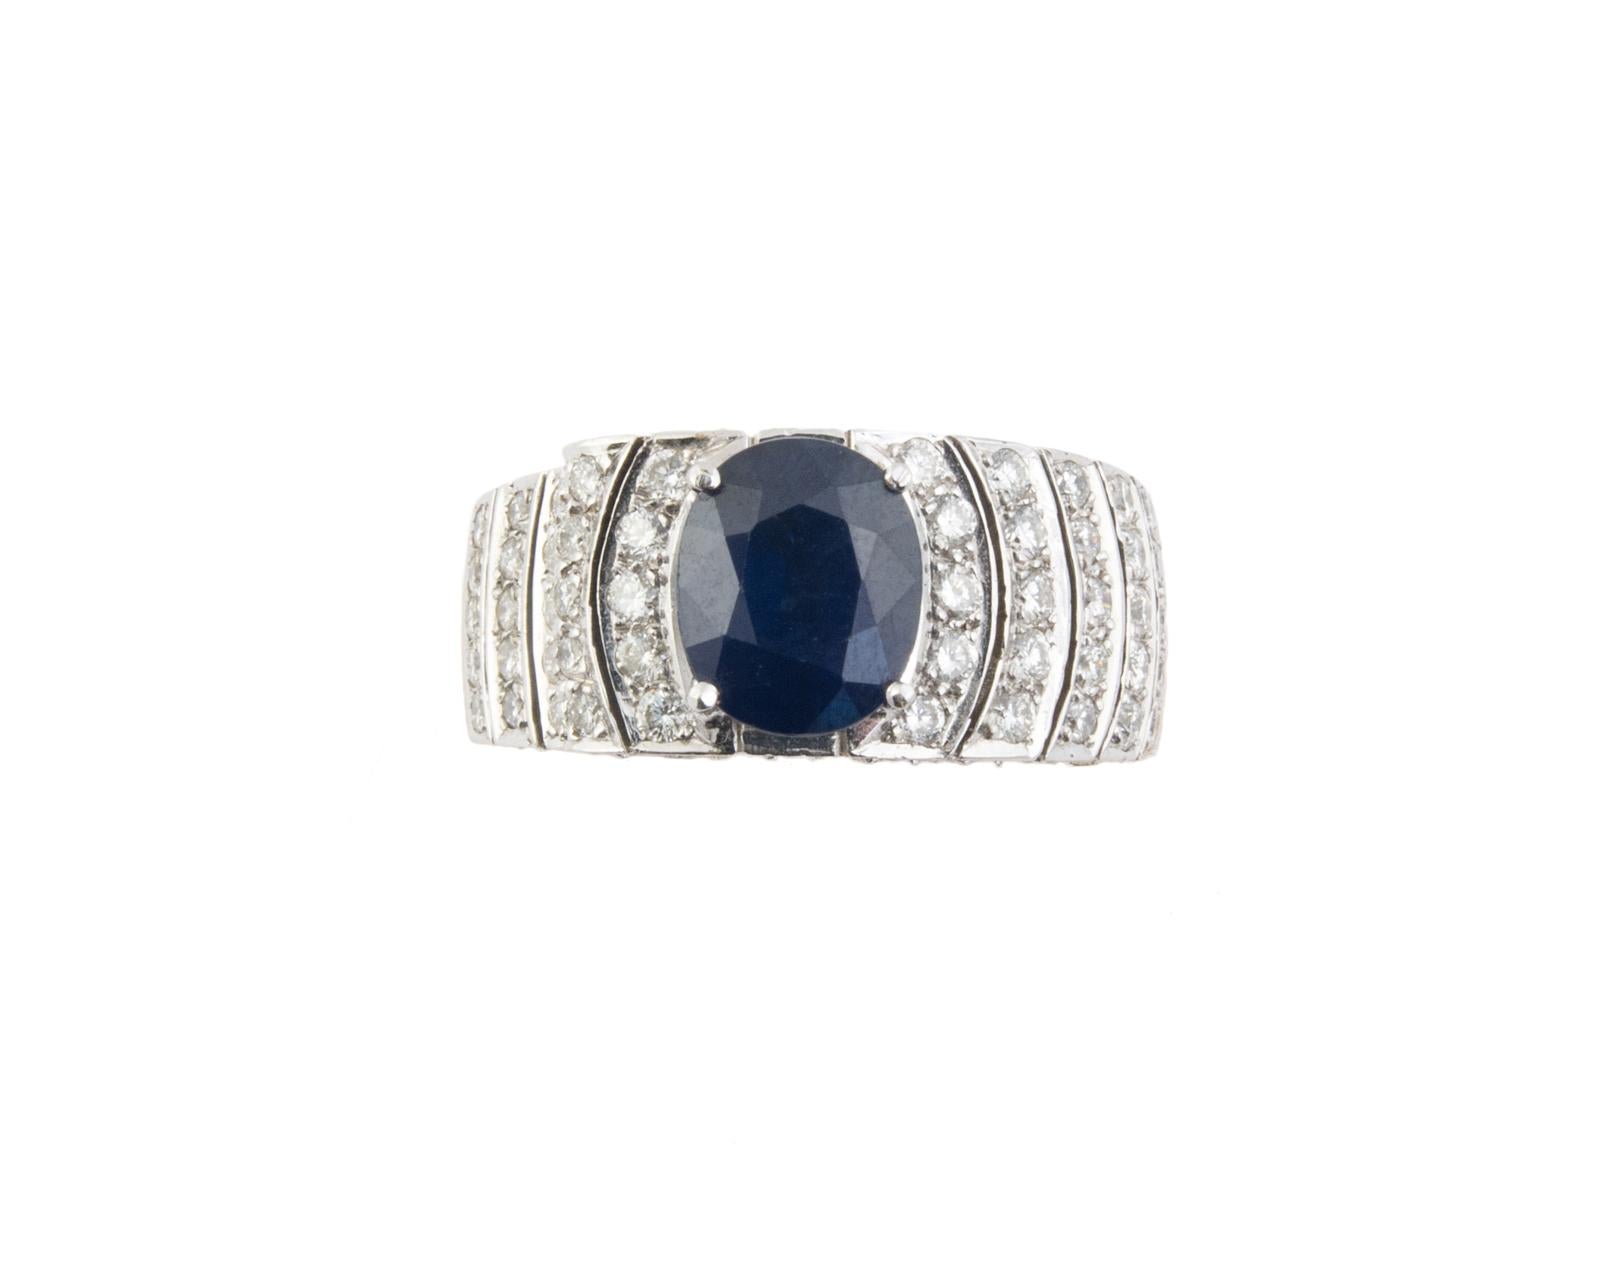 18kt Gold Diamond Ring features a oval  4,20-carat  Blue Sapphire as a center stone and showcases 4,00 carats round diamonds colour G -Vs1.
